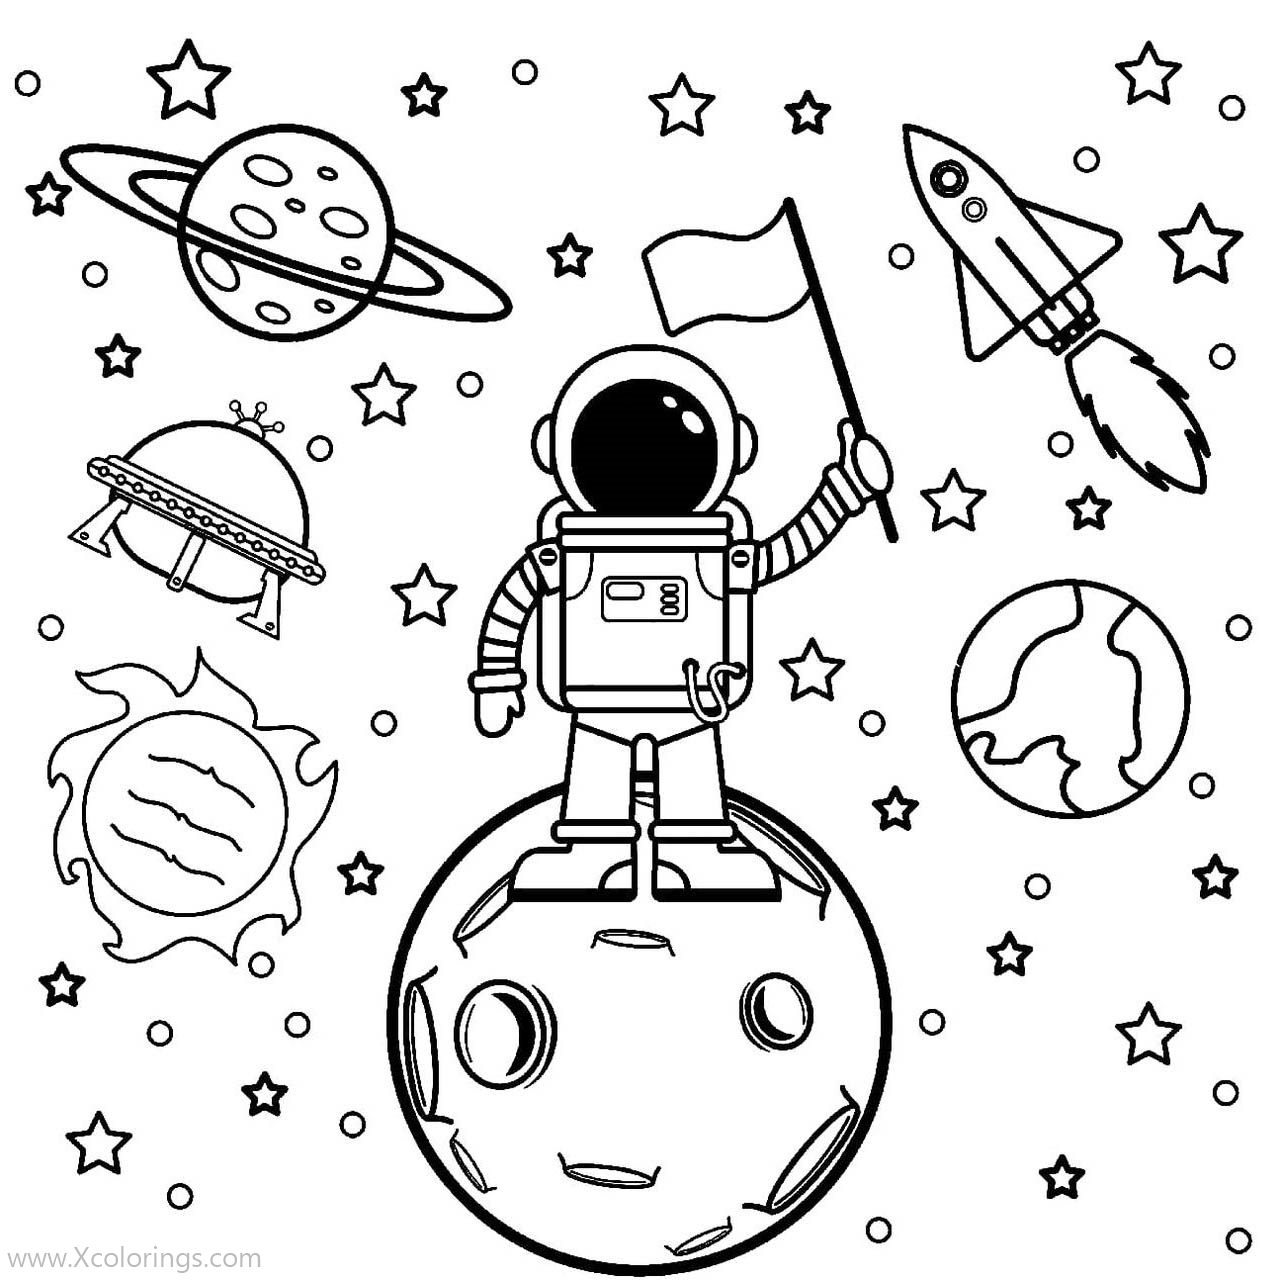 Free Astronaut Landed on a Planet Coloring Pages printable